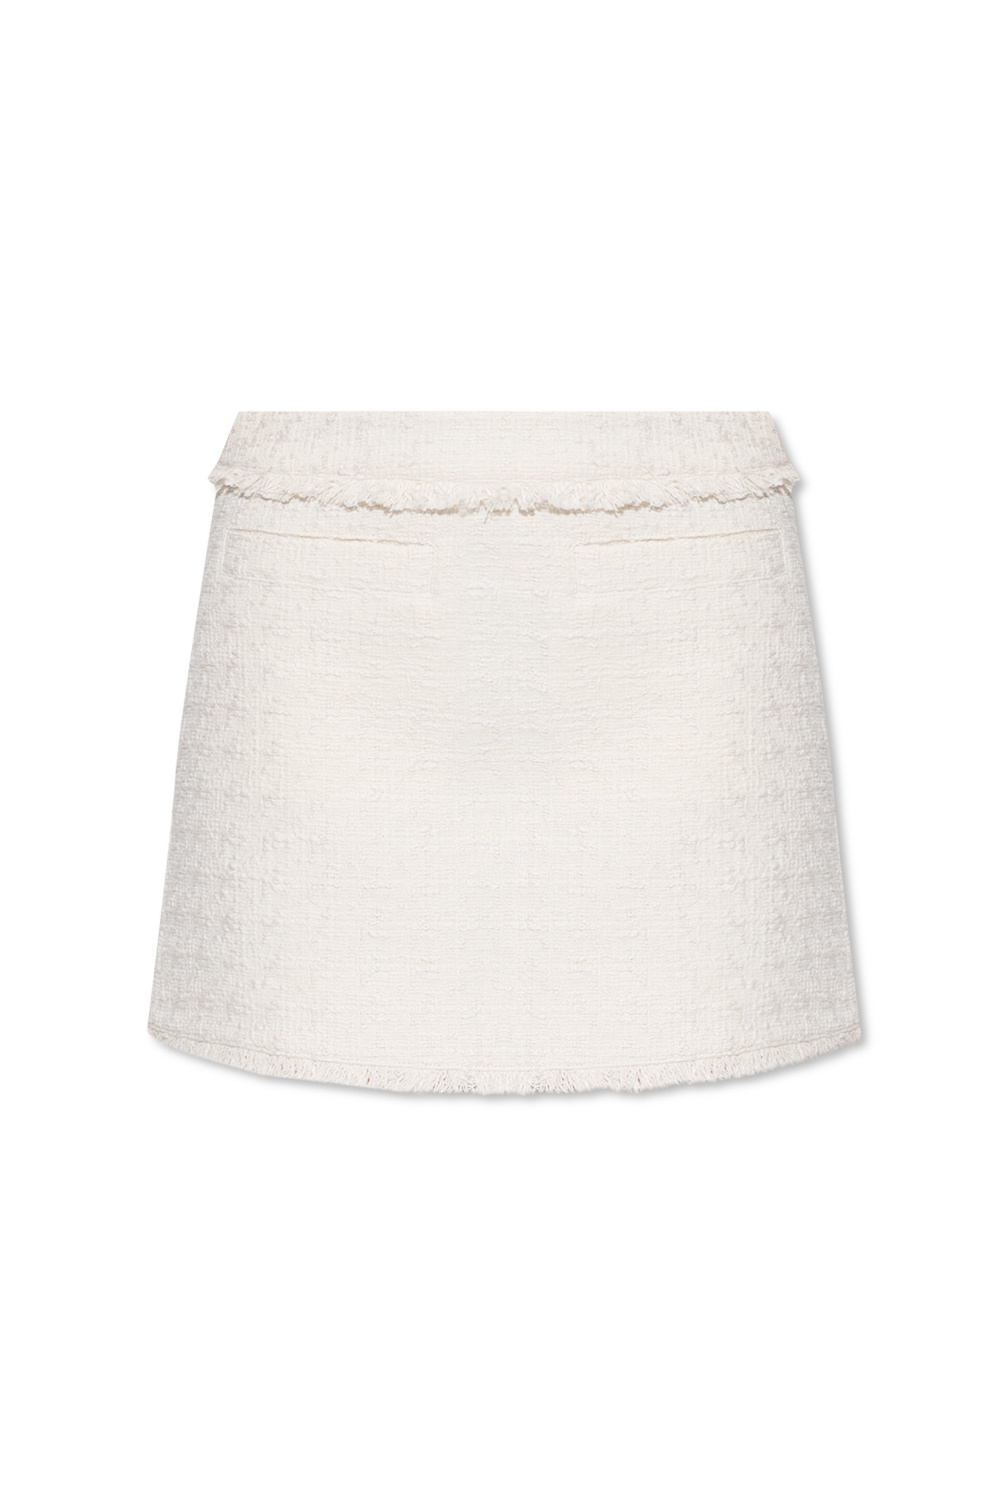 PROENZA SCHOULER WHITE LABEL CUT-OUT TOP Tweed skirt